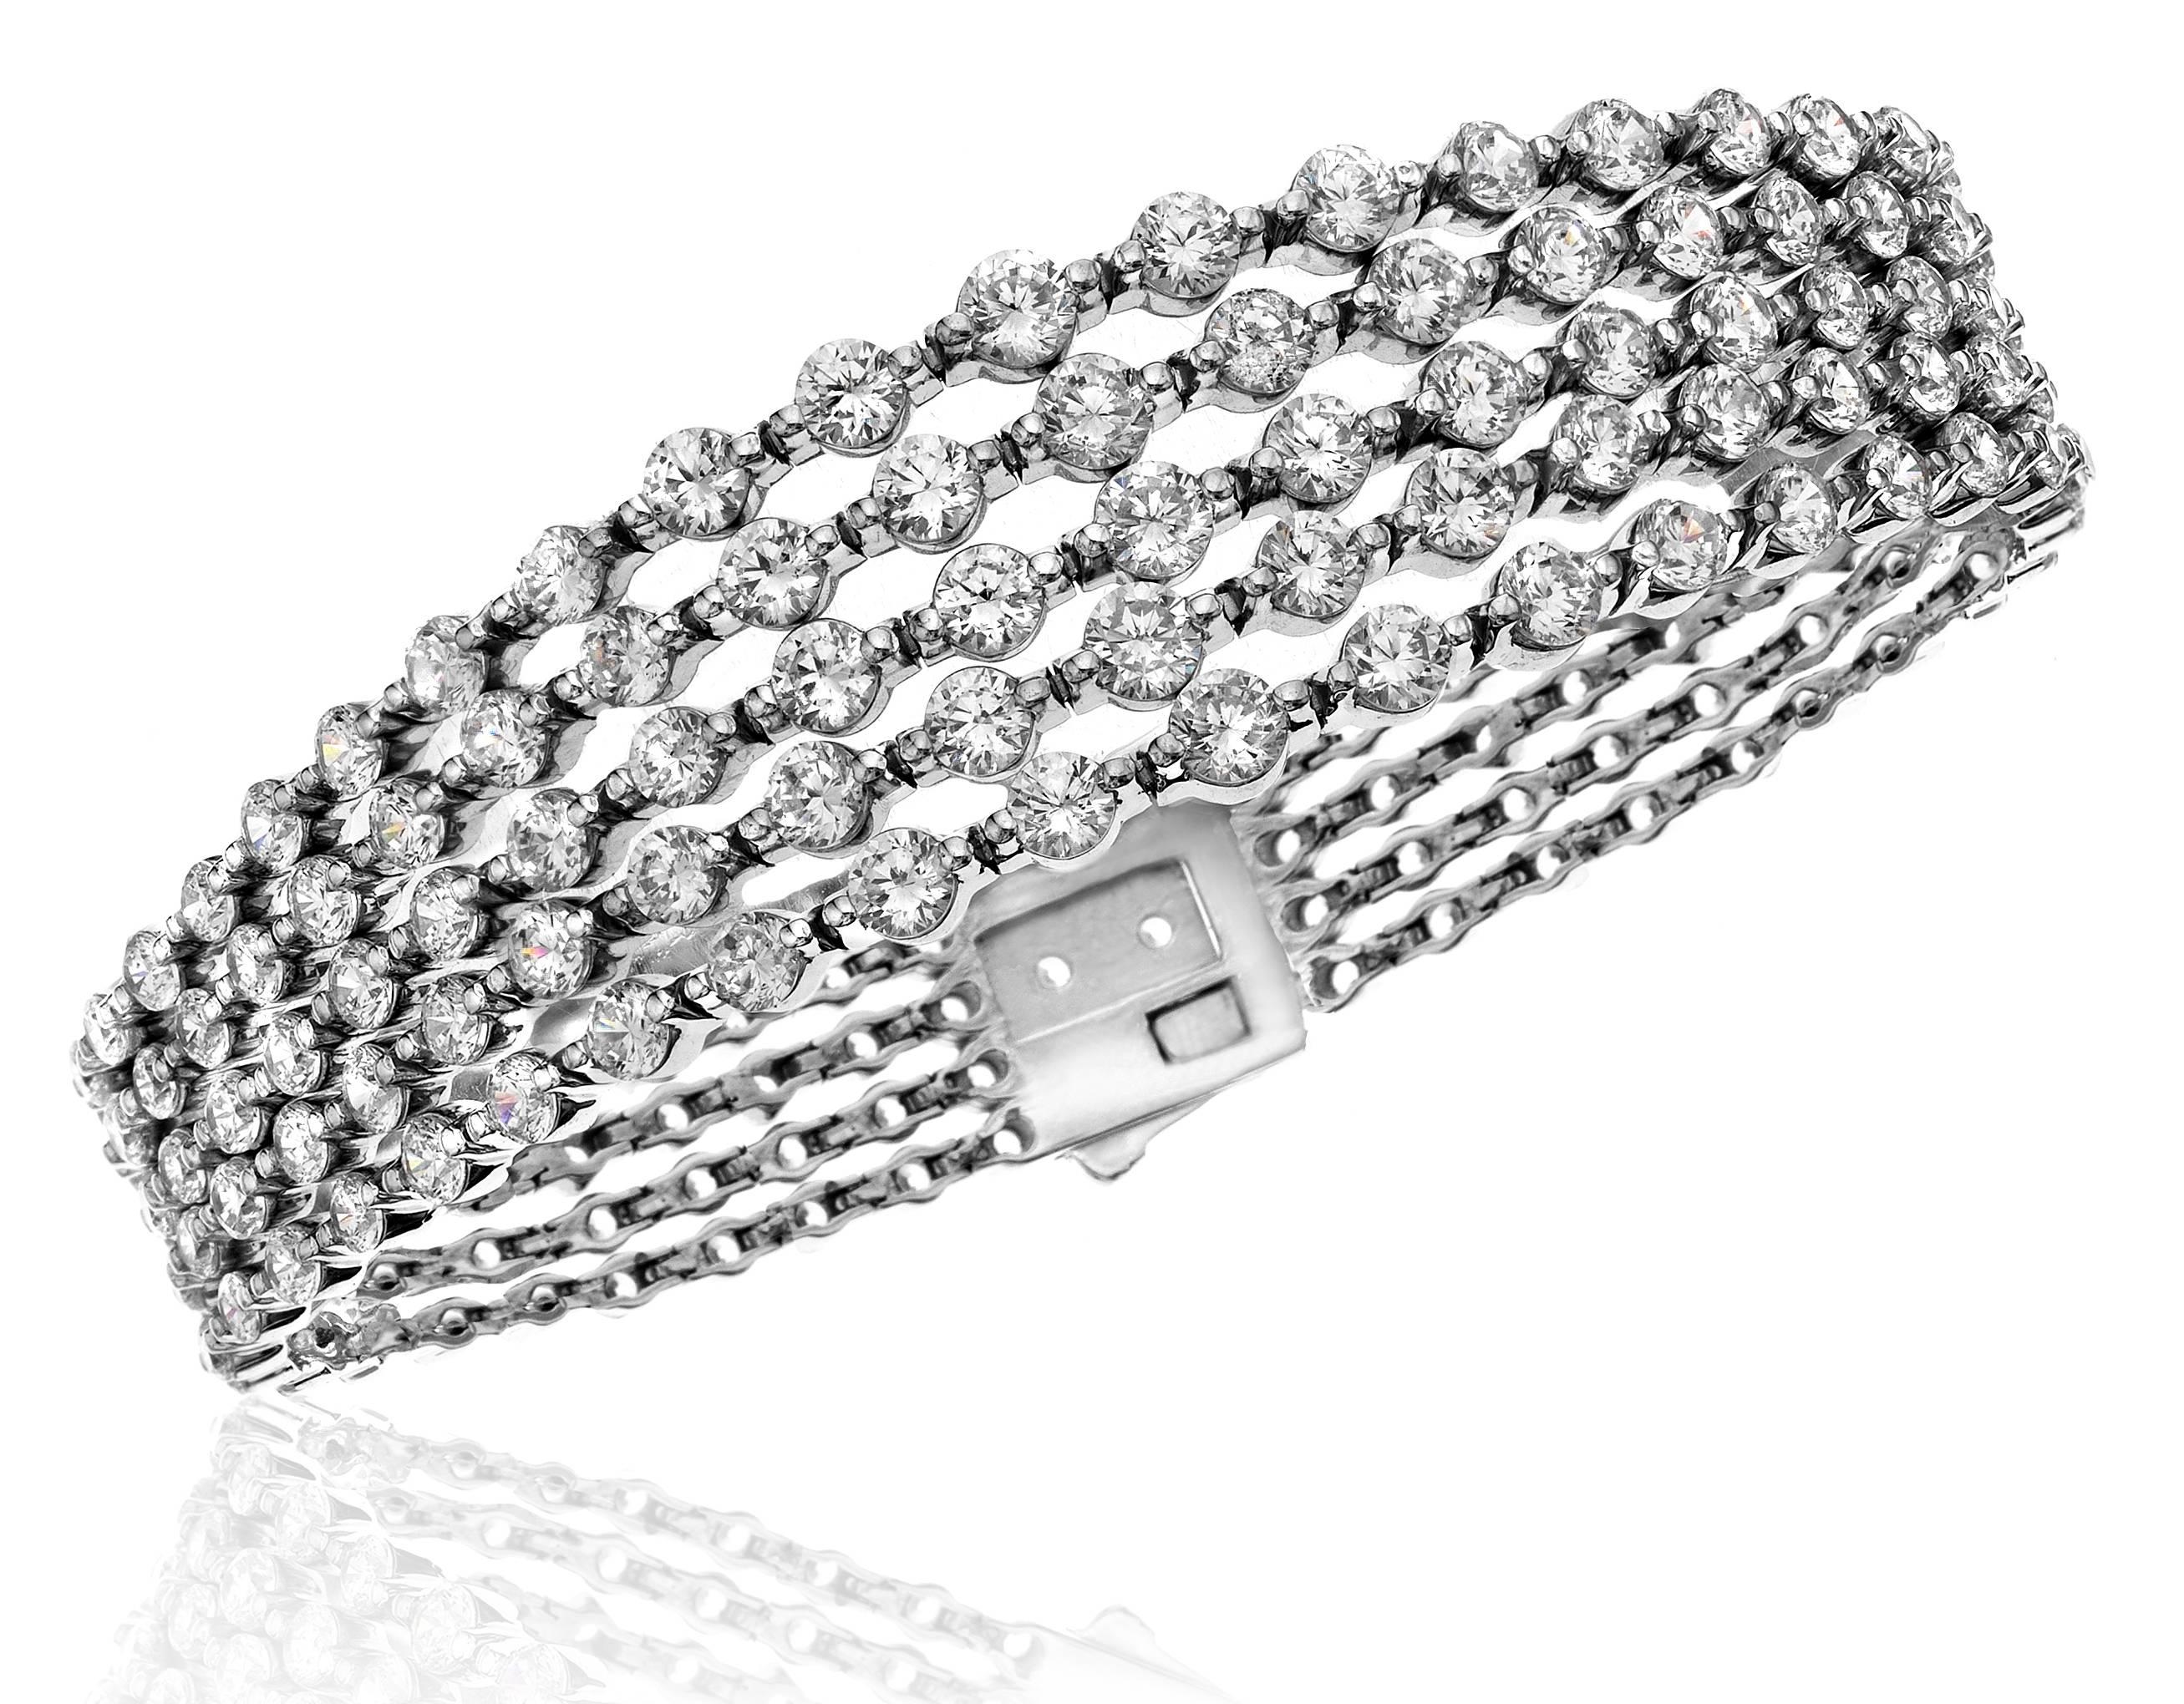 This bracelet features our one of a kind endless push lock mechanism with Graduating diamonds up to .25ct each!  The whole bracelet is encrusted with natural diamonds including the lock! 5 rows of diamonds! 
Can be shortened or lengthened because we